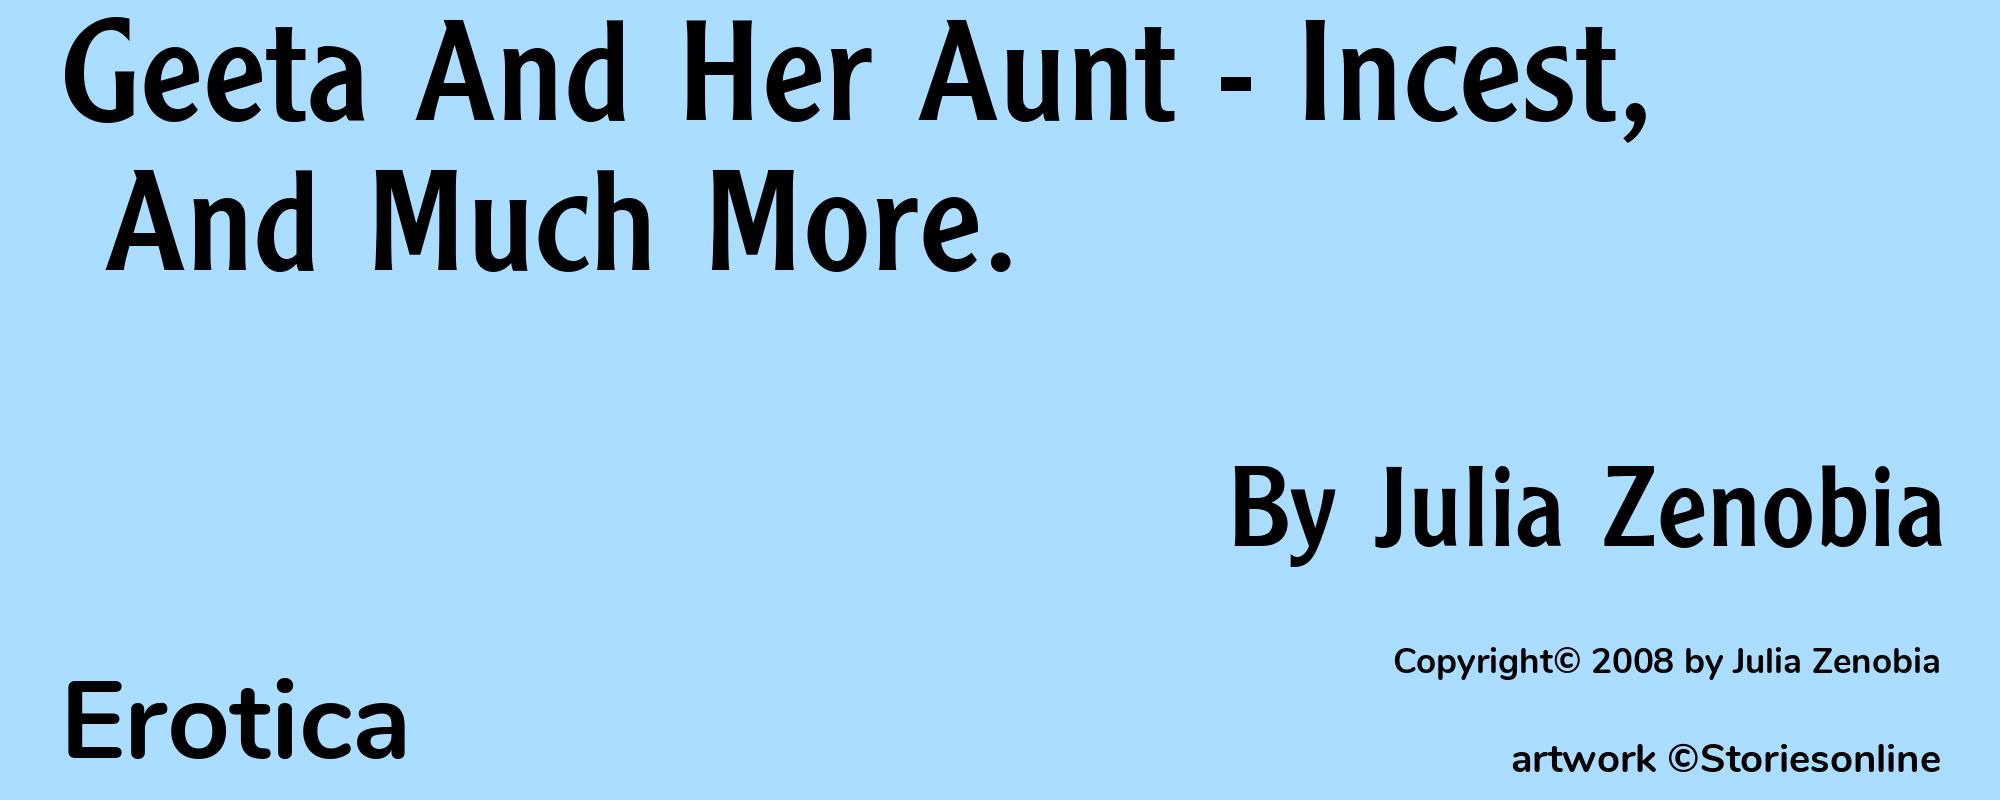 Geeta And Her Aunt - Incest, And Much More. - Cover